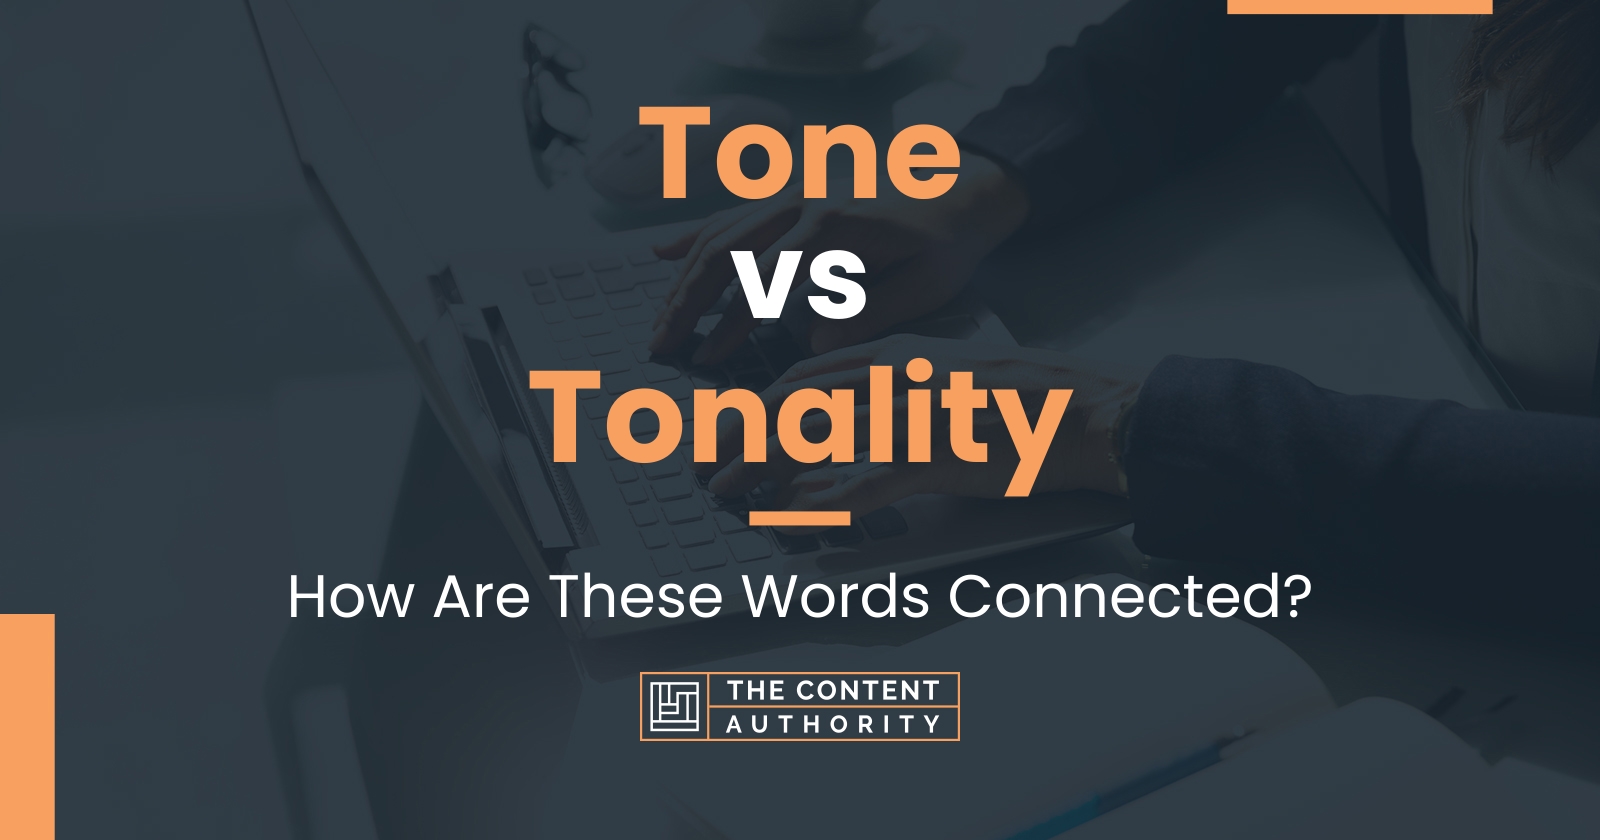 Tone vs Tonality: How Are These Words Connected?